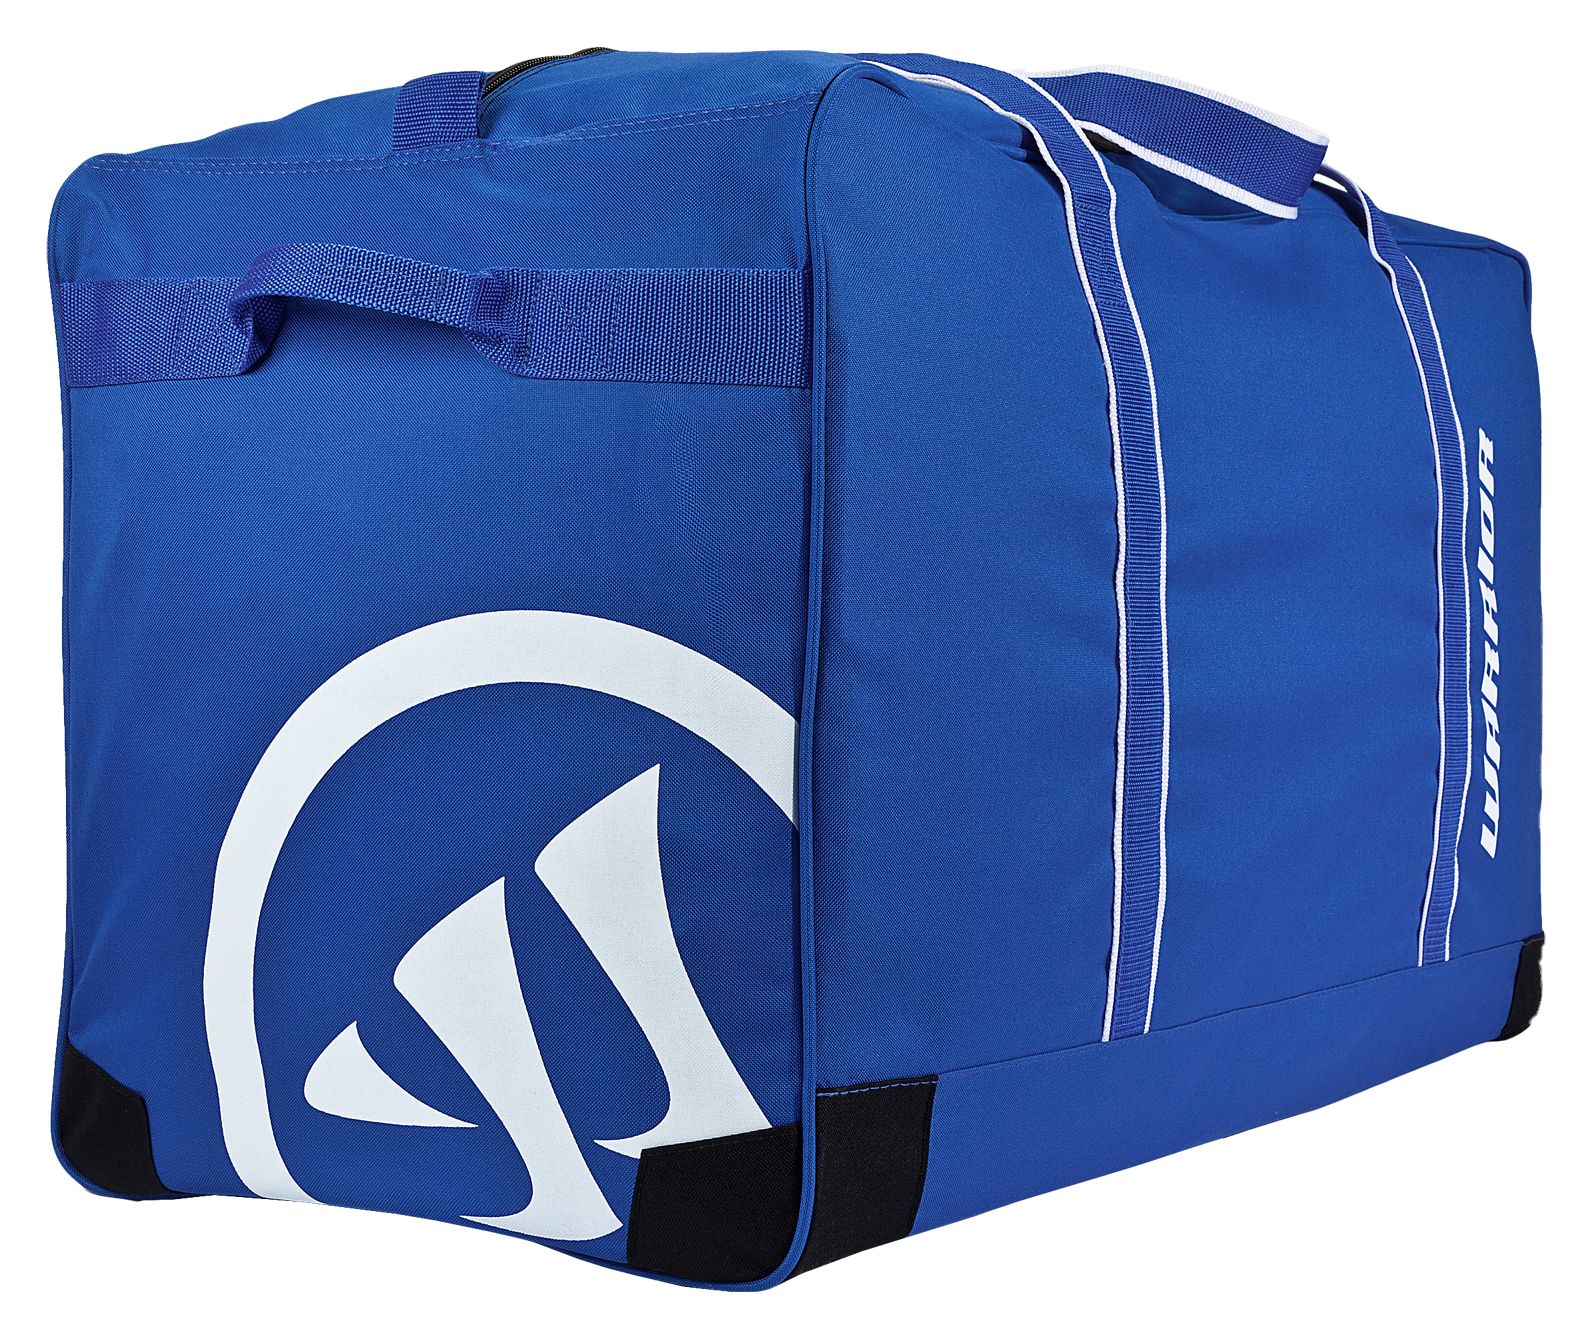 Team Goalie Duffel Bag, Royal Blue with White image number 2